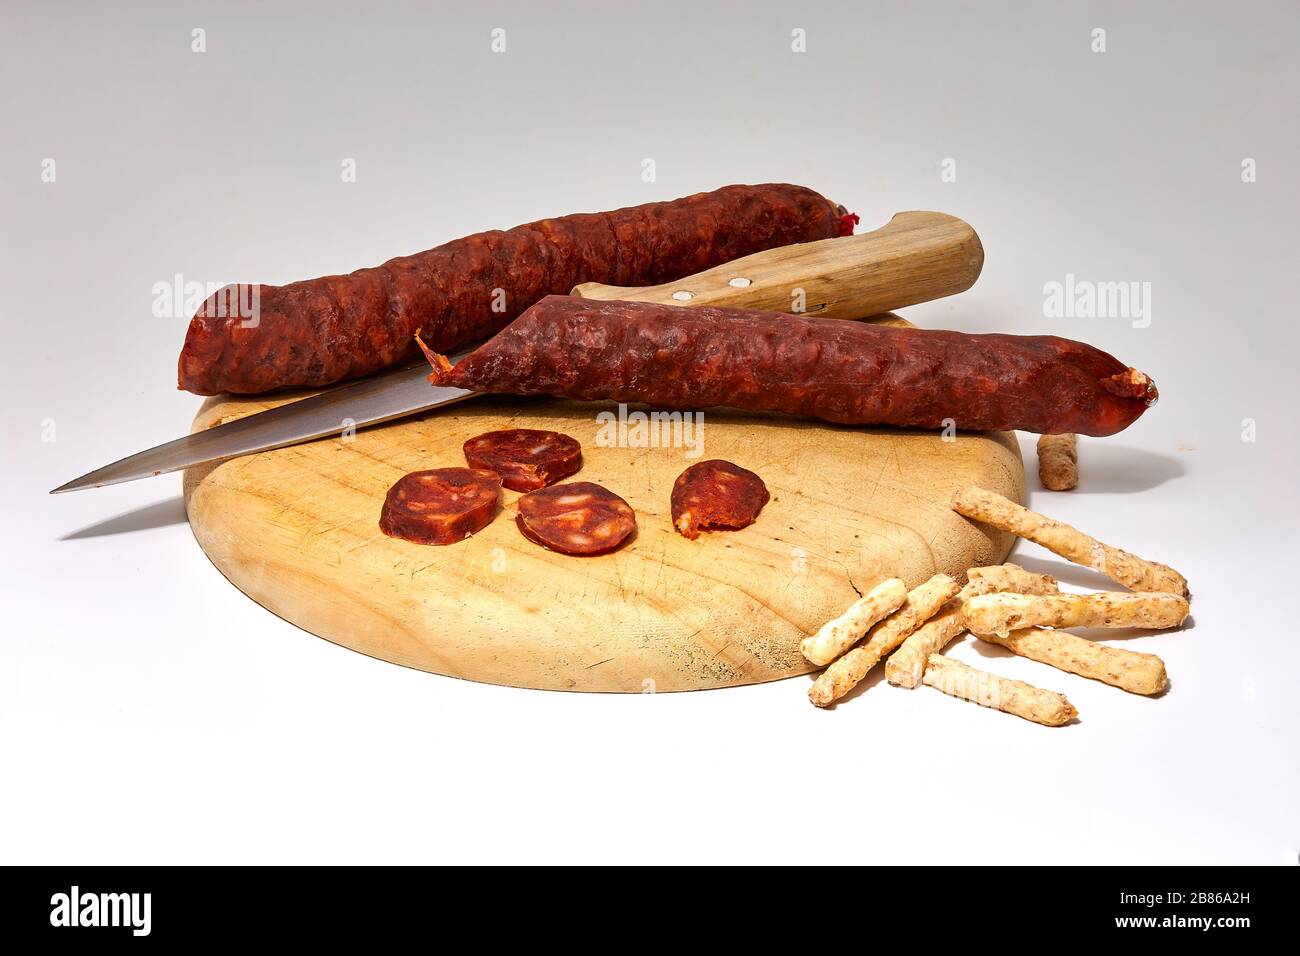 still life of cut sausage on wooden board with knife and white background Stock Photo